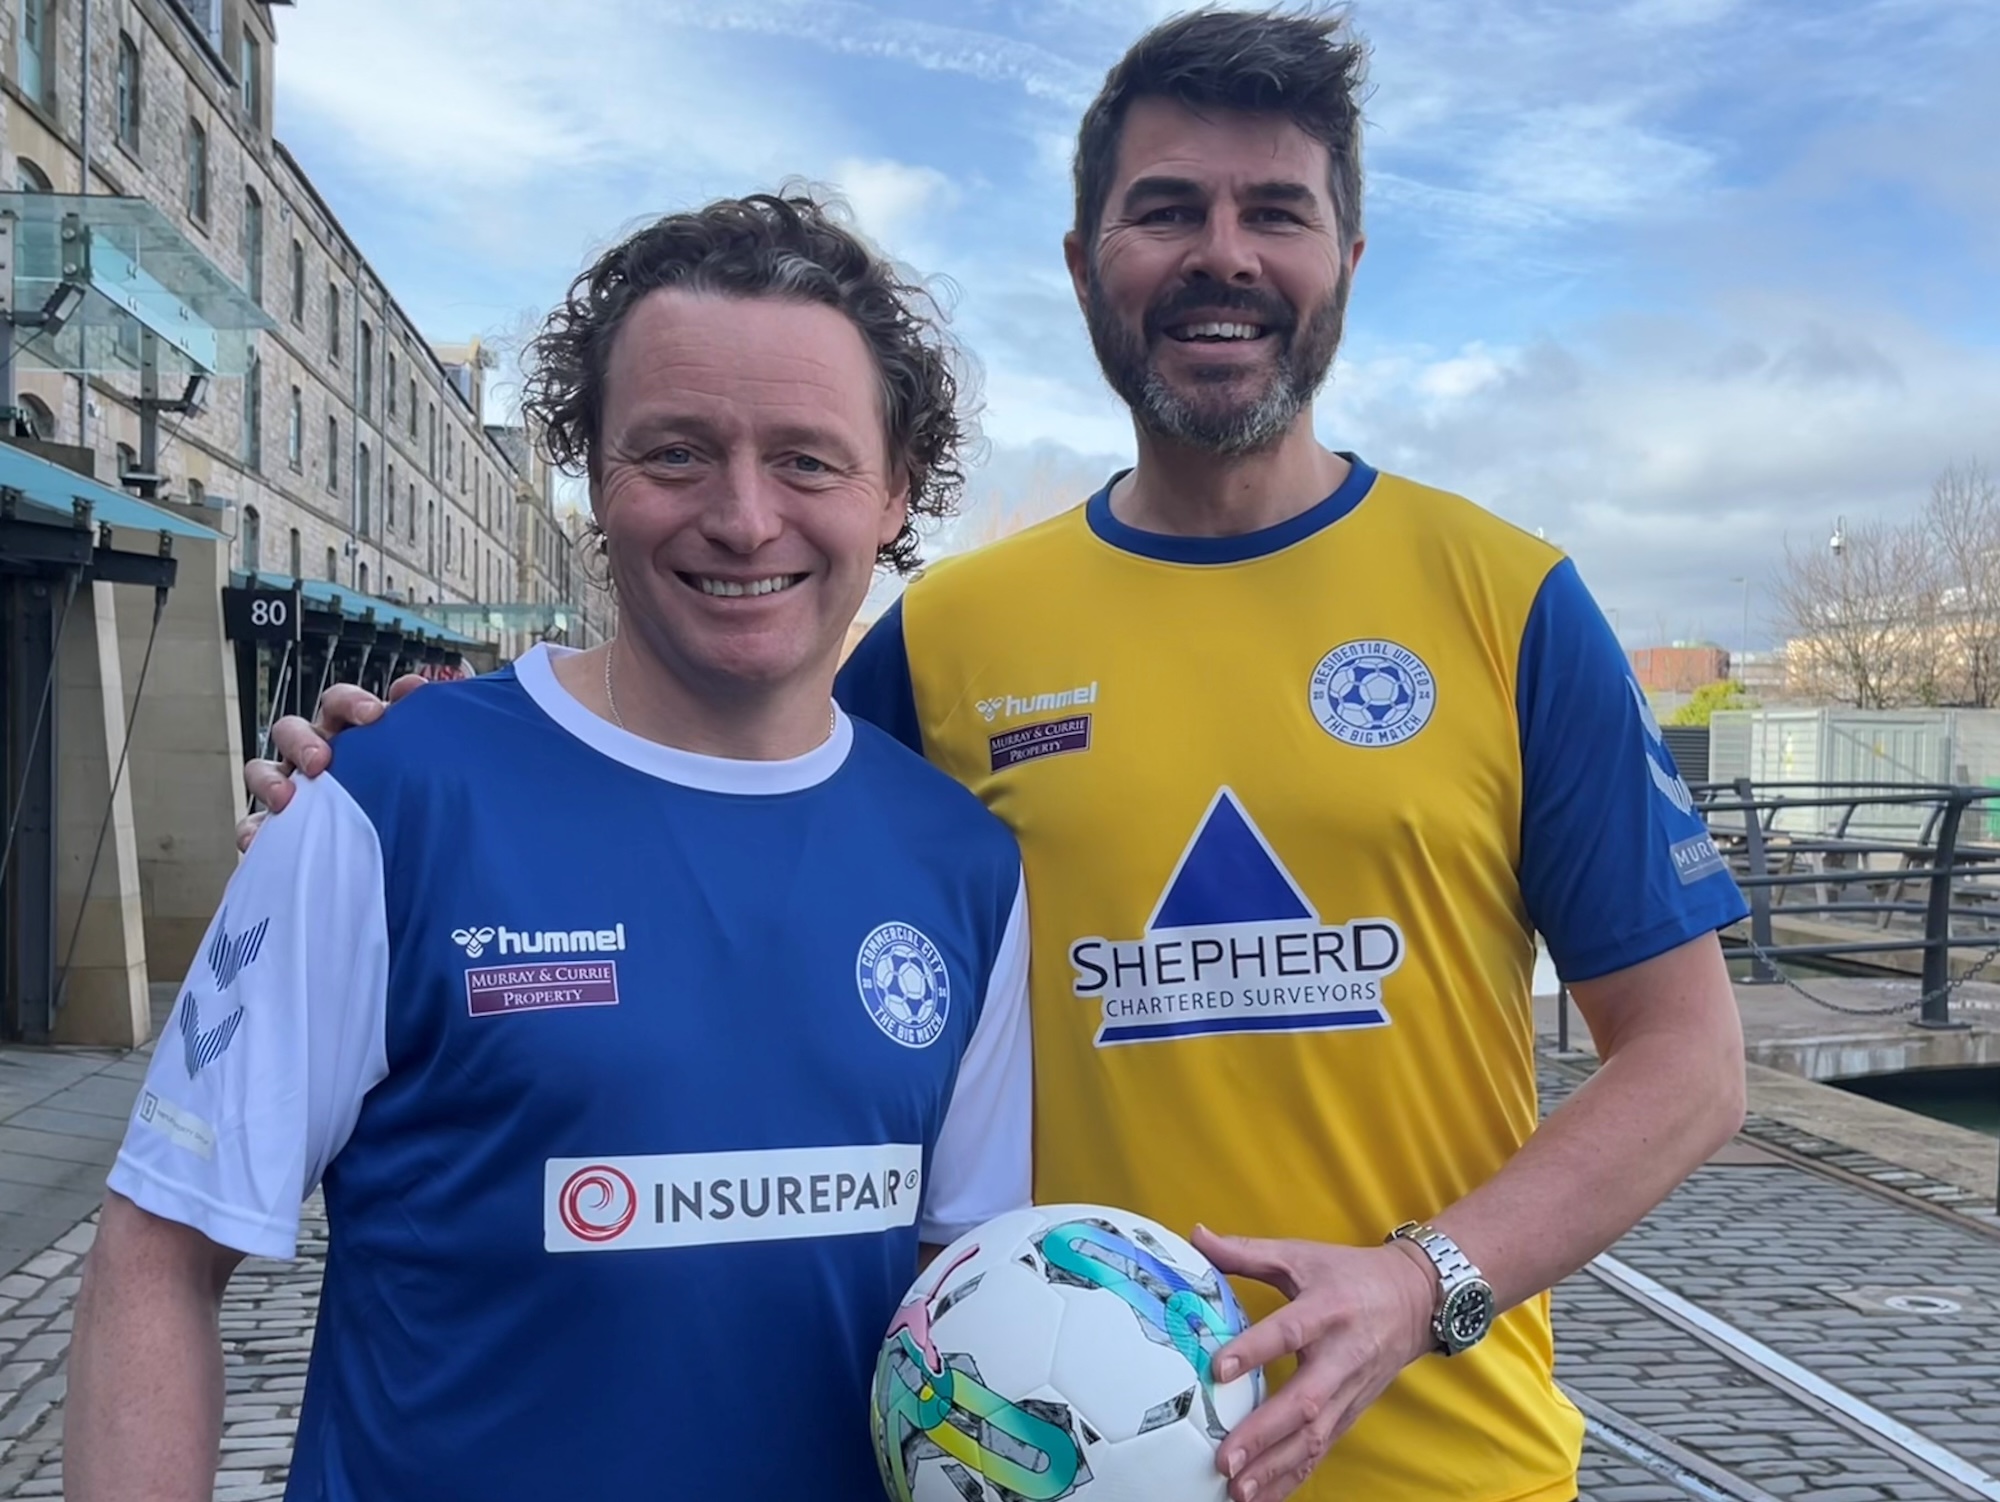 Edinburgh businesses unite for Big Match charity event supporting The Yard